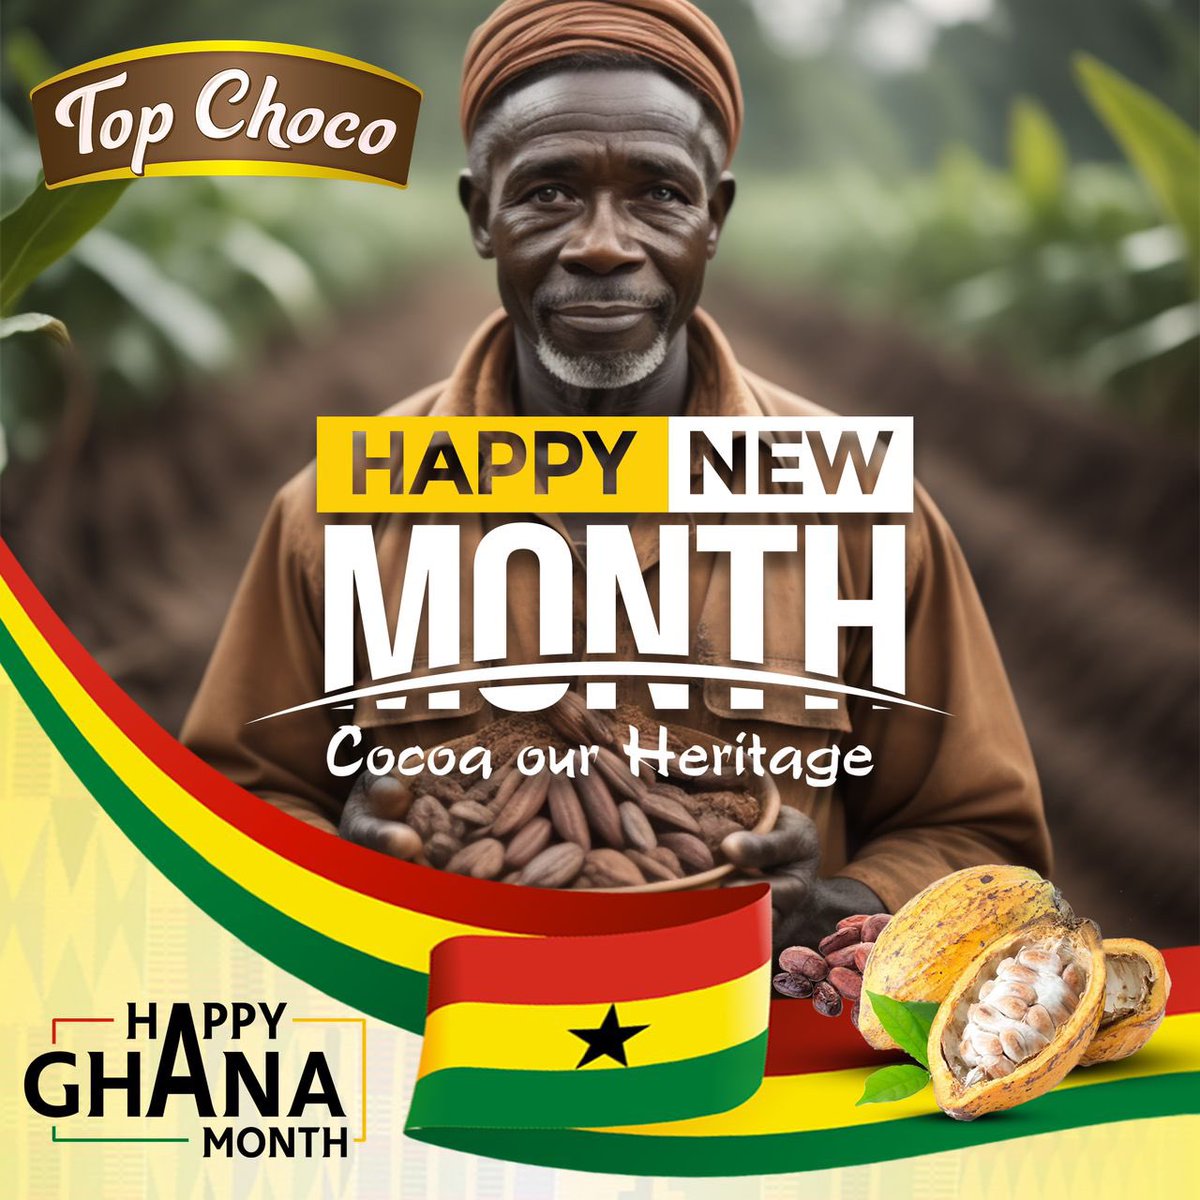 Happy New Month everyone! 🎉   March is not just about new beginnings, but also a time to celebrate Ghanaian culture. Join us in embracing the essence of Ghana this month! 🇬🇭🍫 #TasteTopChoco #GhanaMonth #TopChoco